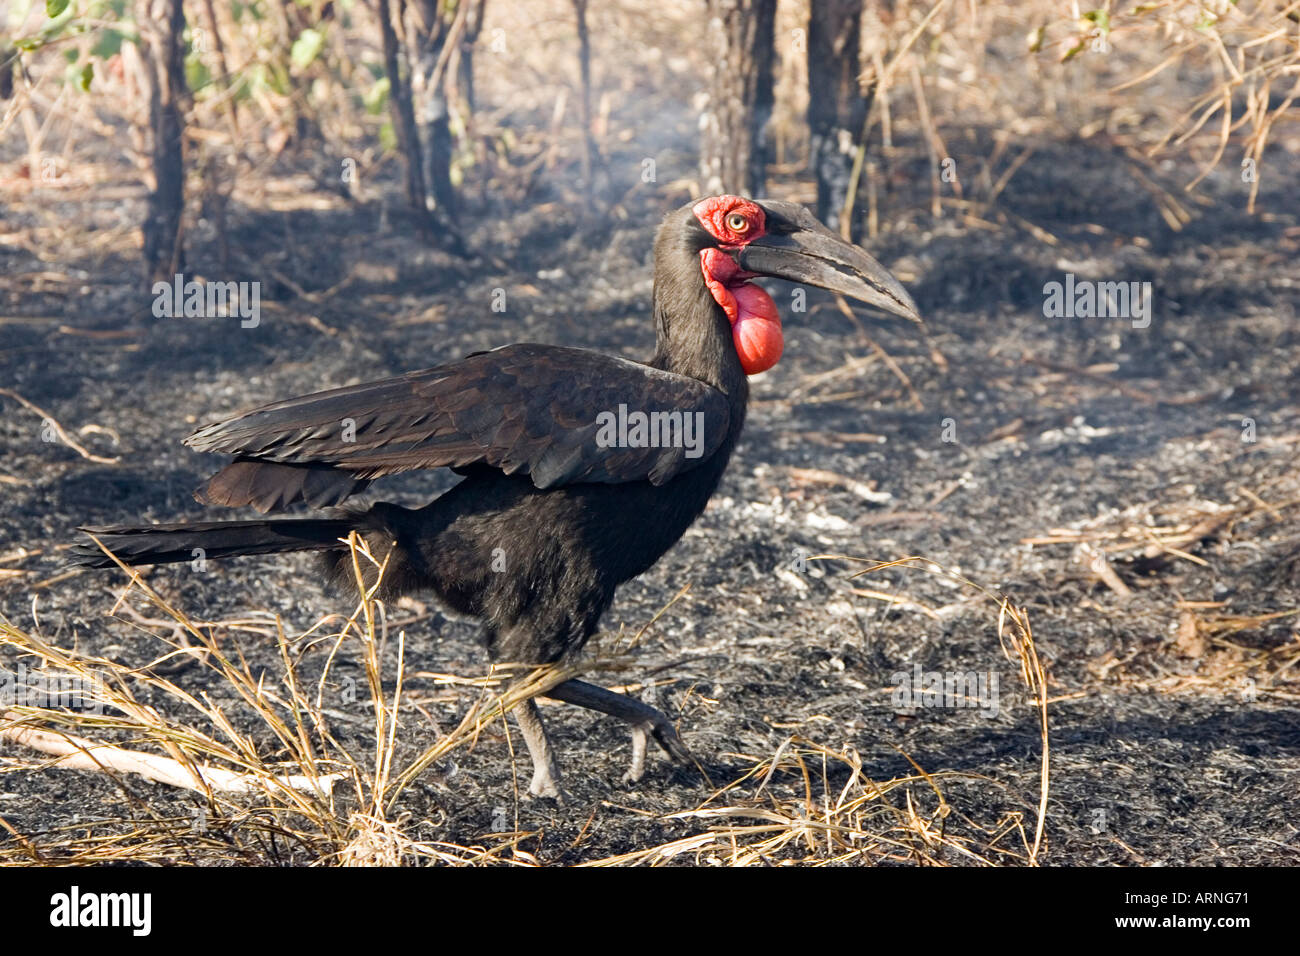 southern ground hornbill (Bucorvus leadbeateri), scorched earth, South Africa, Kruger NP, Jul 05. Stock Photo